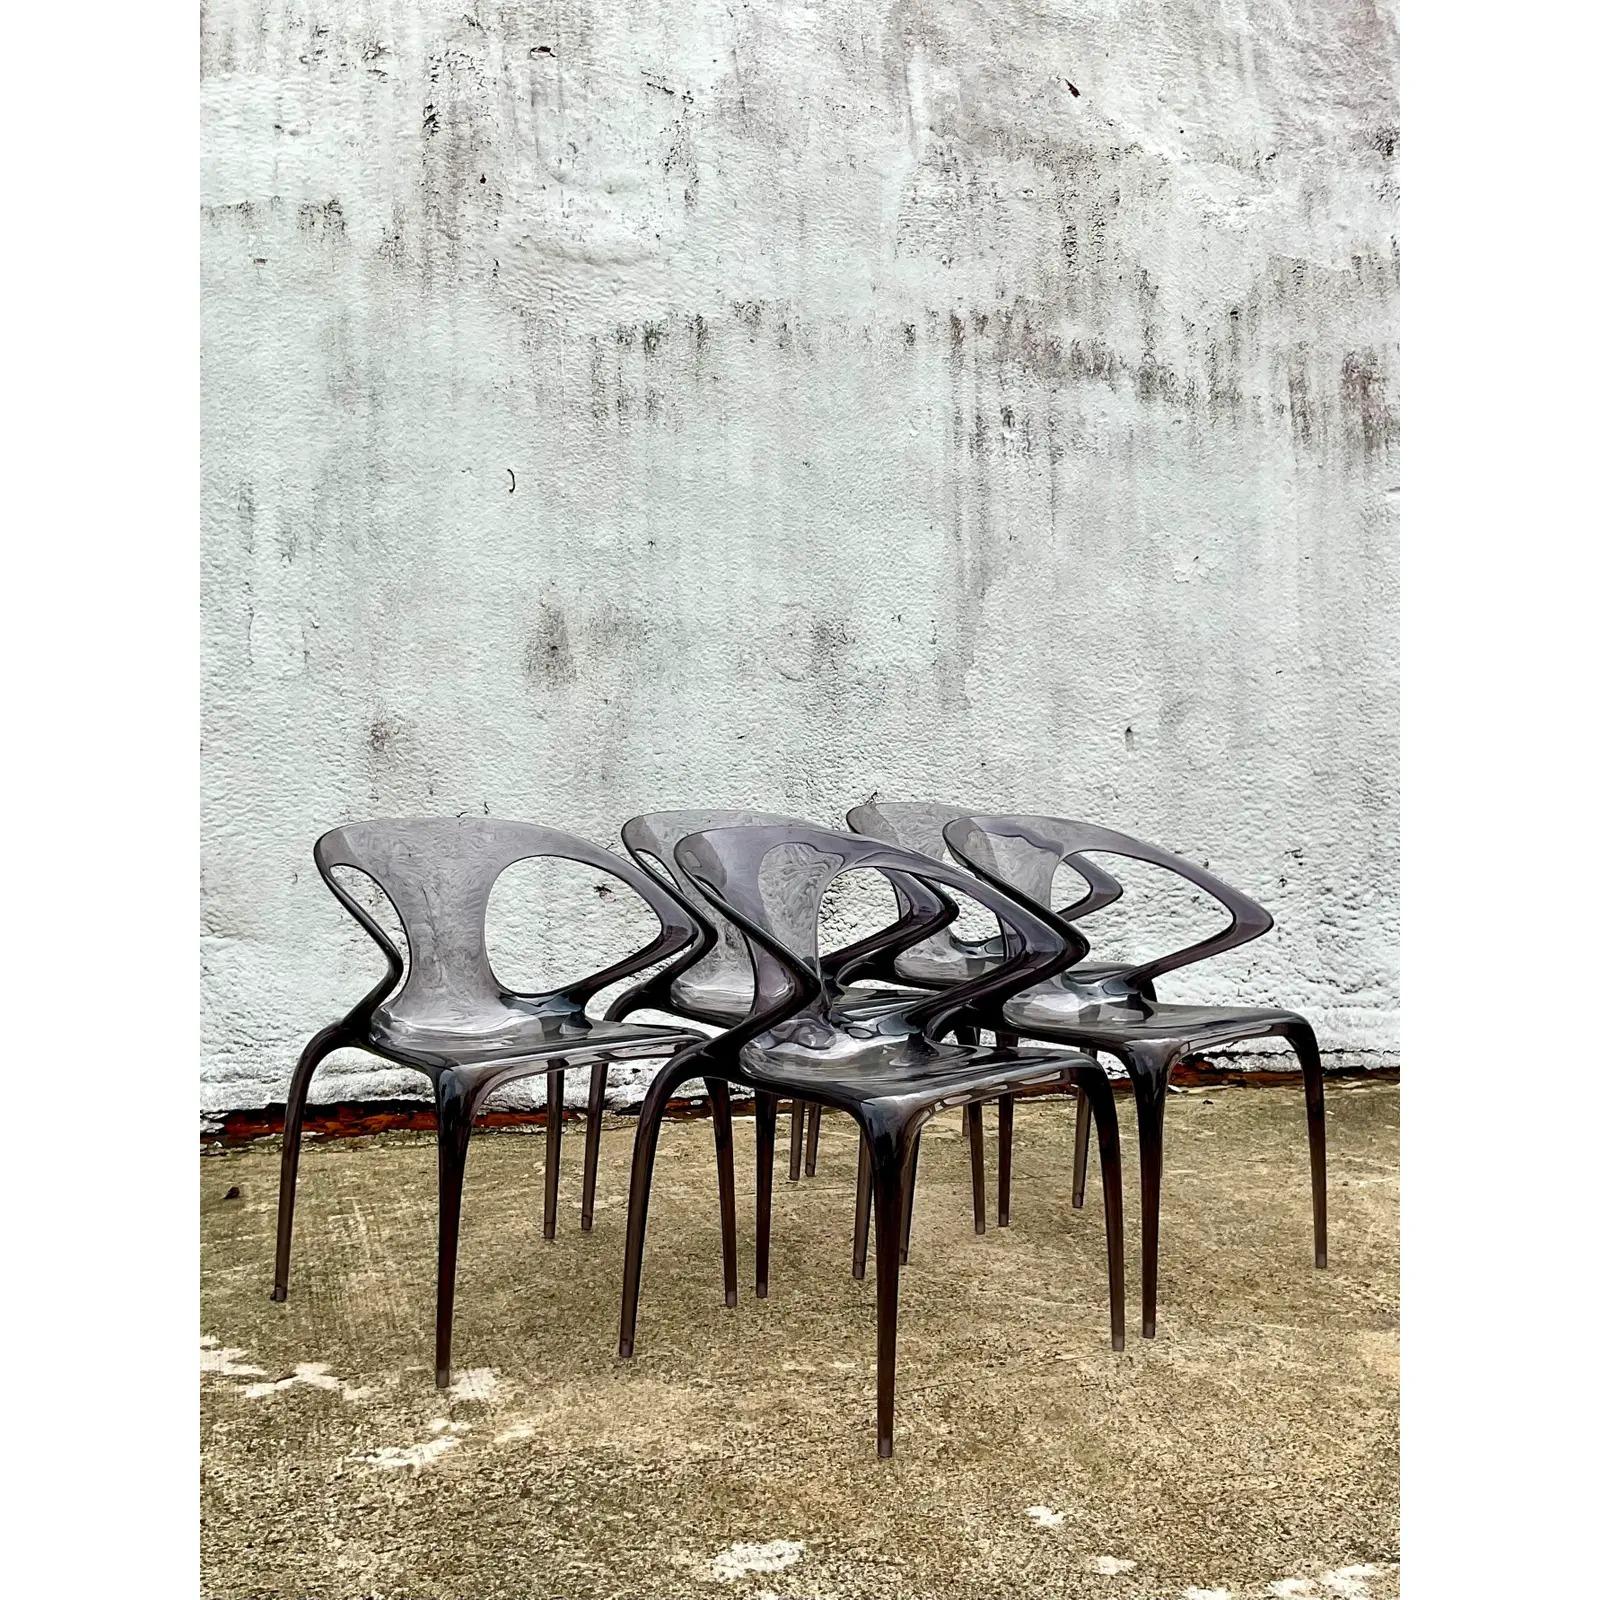 Incredible set of 5 vintage Italian Contemporary lucite dining chairs. Designed by Song Wen Zhong for Roche Bobois. The Ava Bridge style in smoke grey. Acquired from a Palm Beach estate.